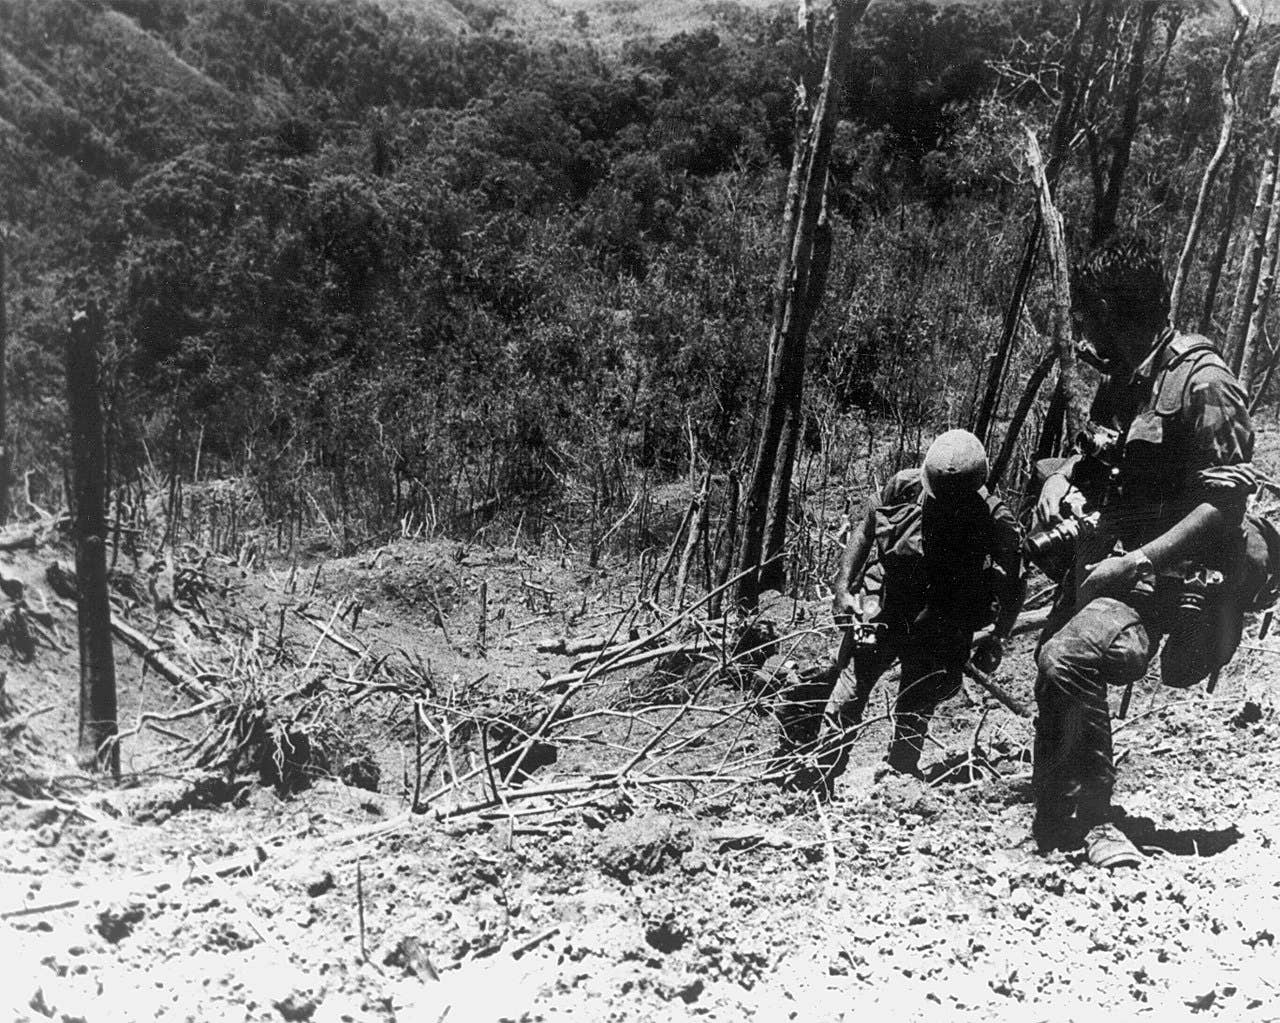 A U. S. Army Photographer and assistant climbing through the devastated landscape on Dong Ap Bia after the battle. (Melvin Zais Photograph Collection). (Photo Credit: USAMHI)